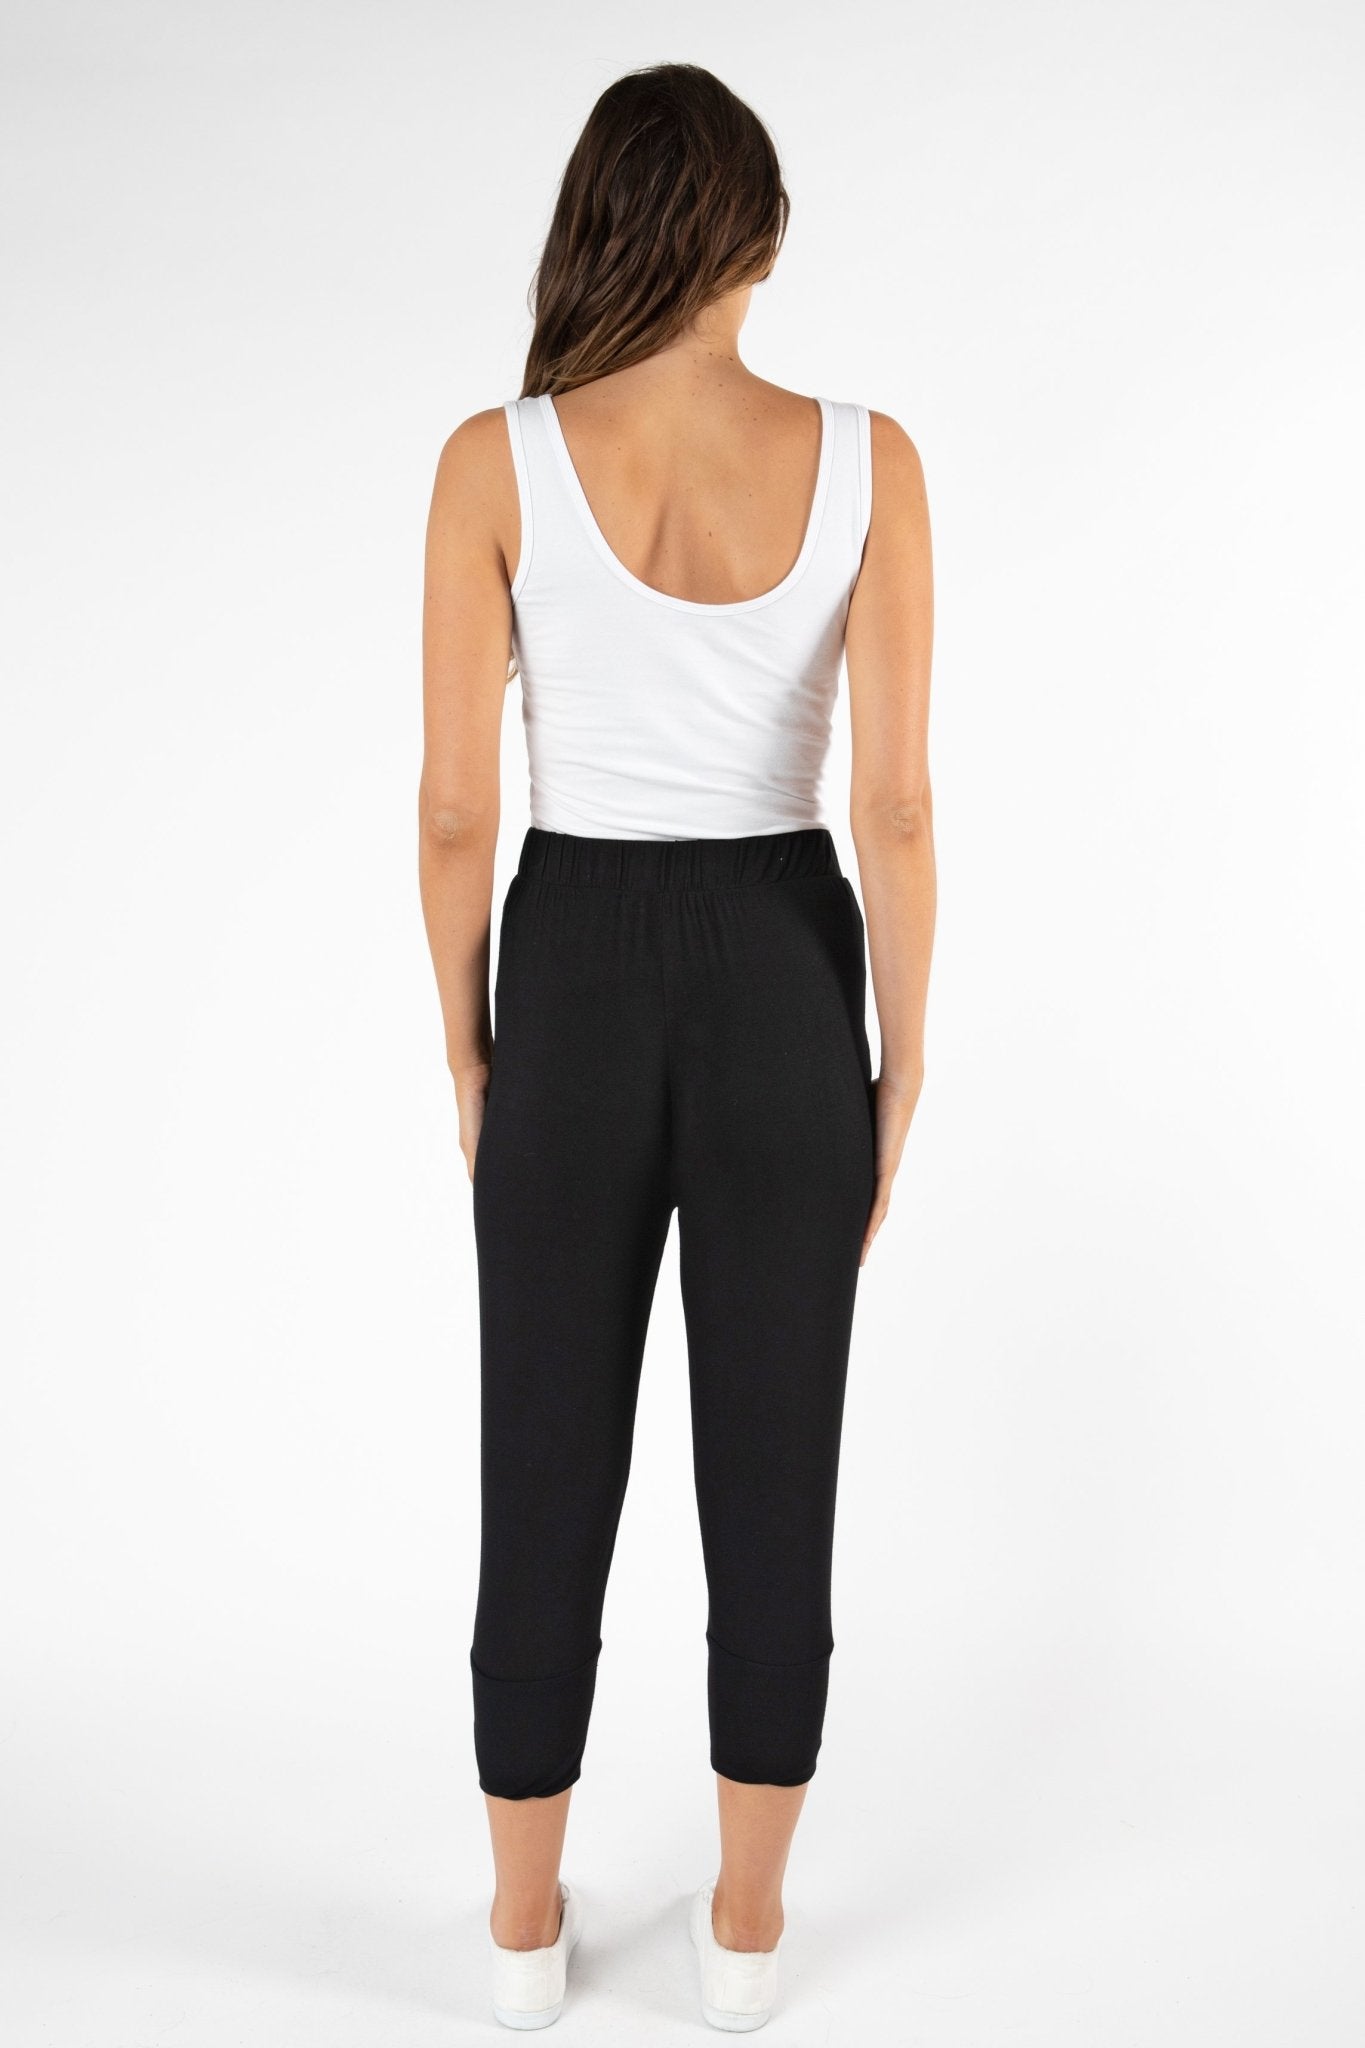 Betty Basics Lyon Pant in Black Size 8 or 10 Only - Hey Sara